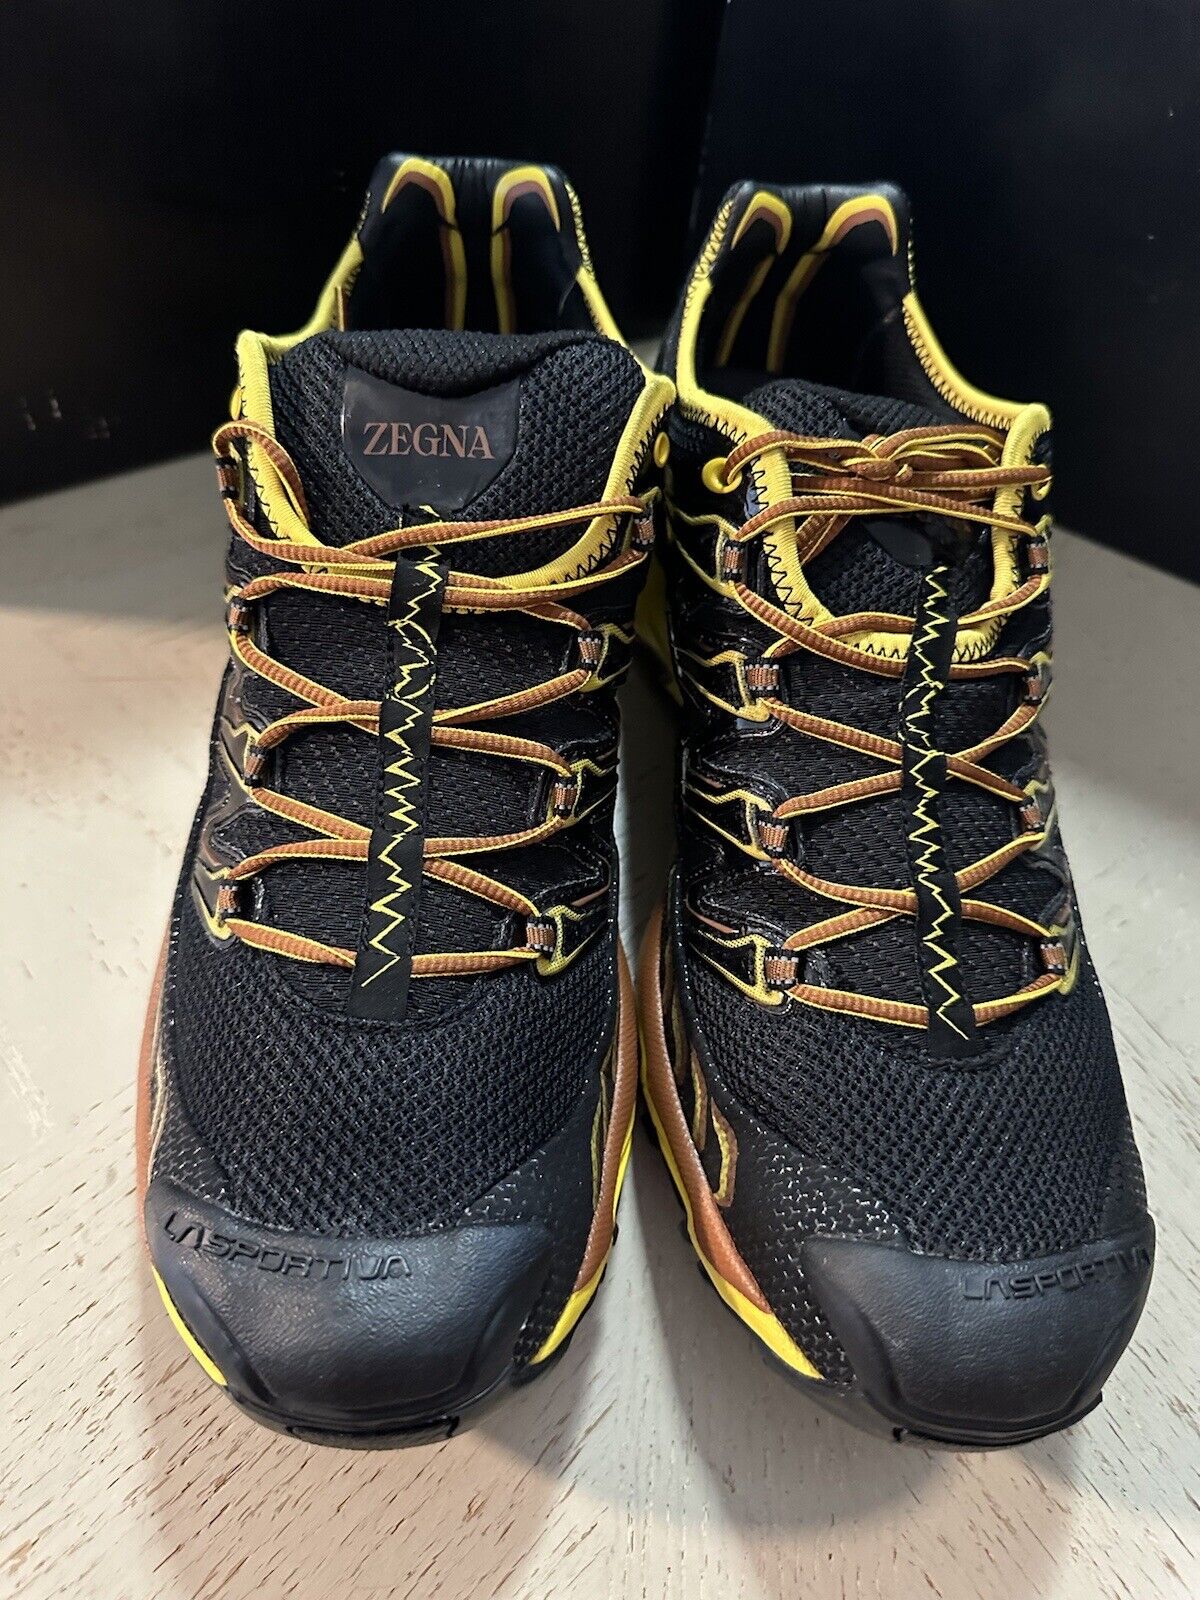 New Zegna Men Sneakers Shoes Black/Yellow/Brown 10 US